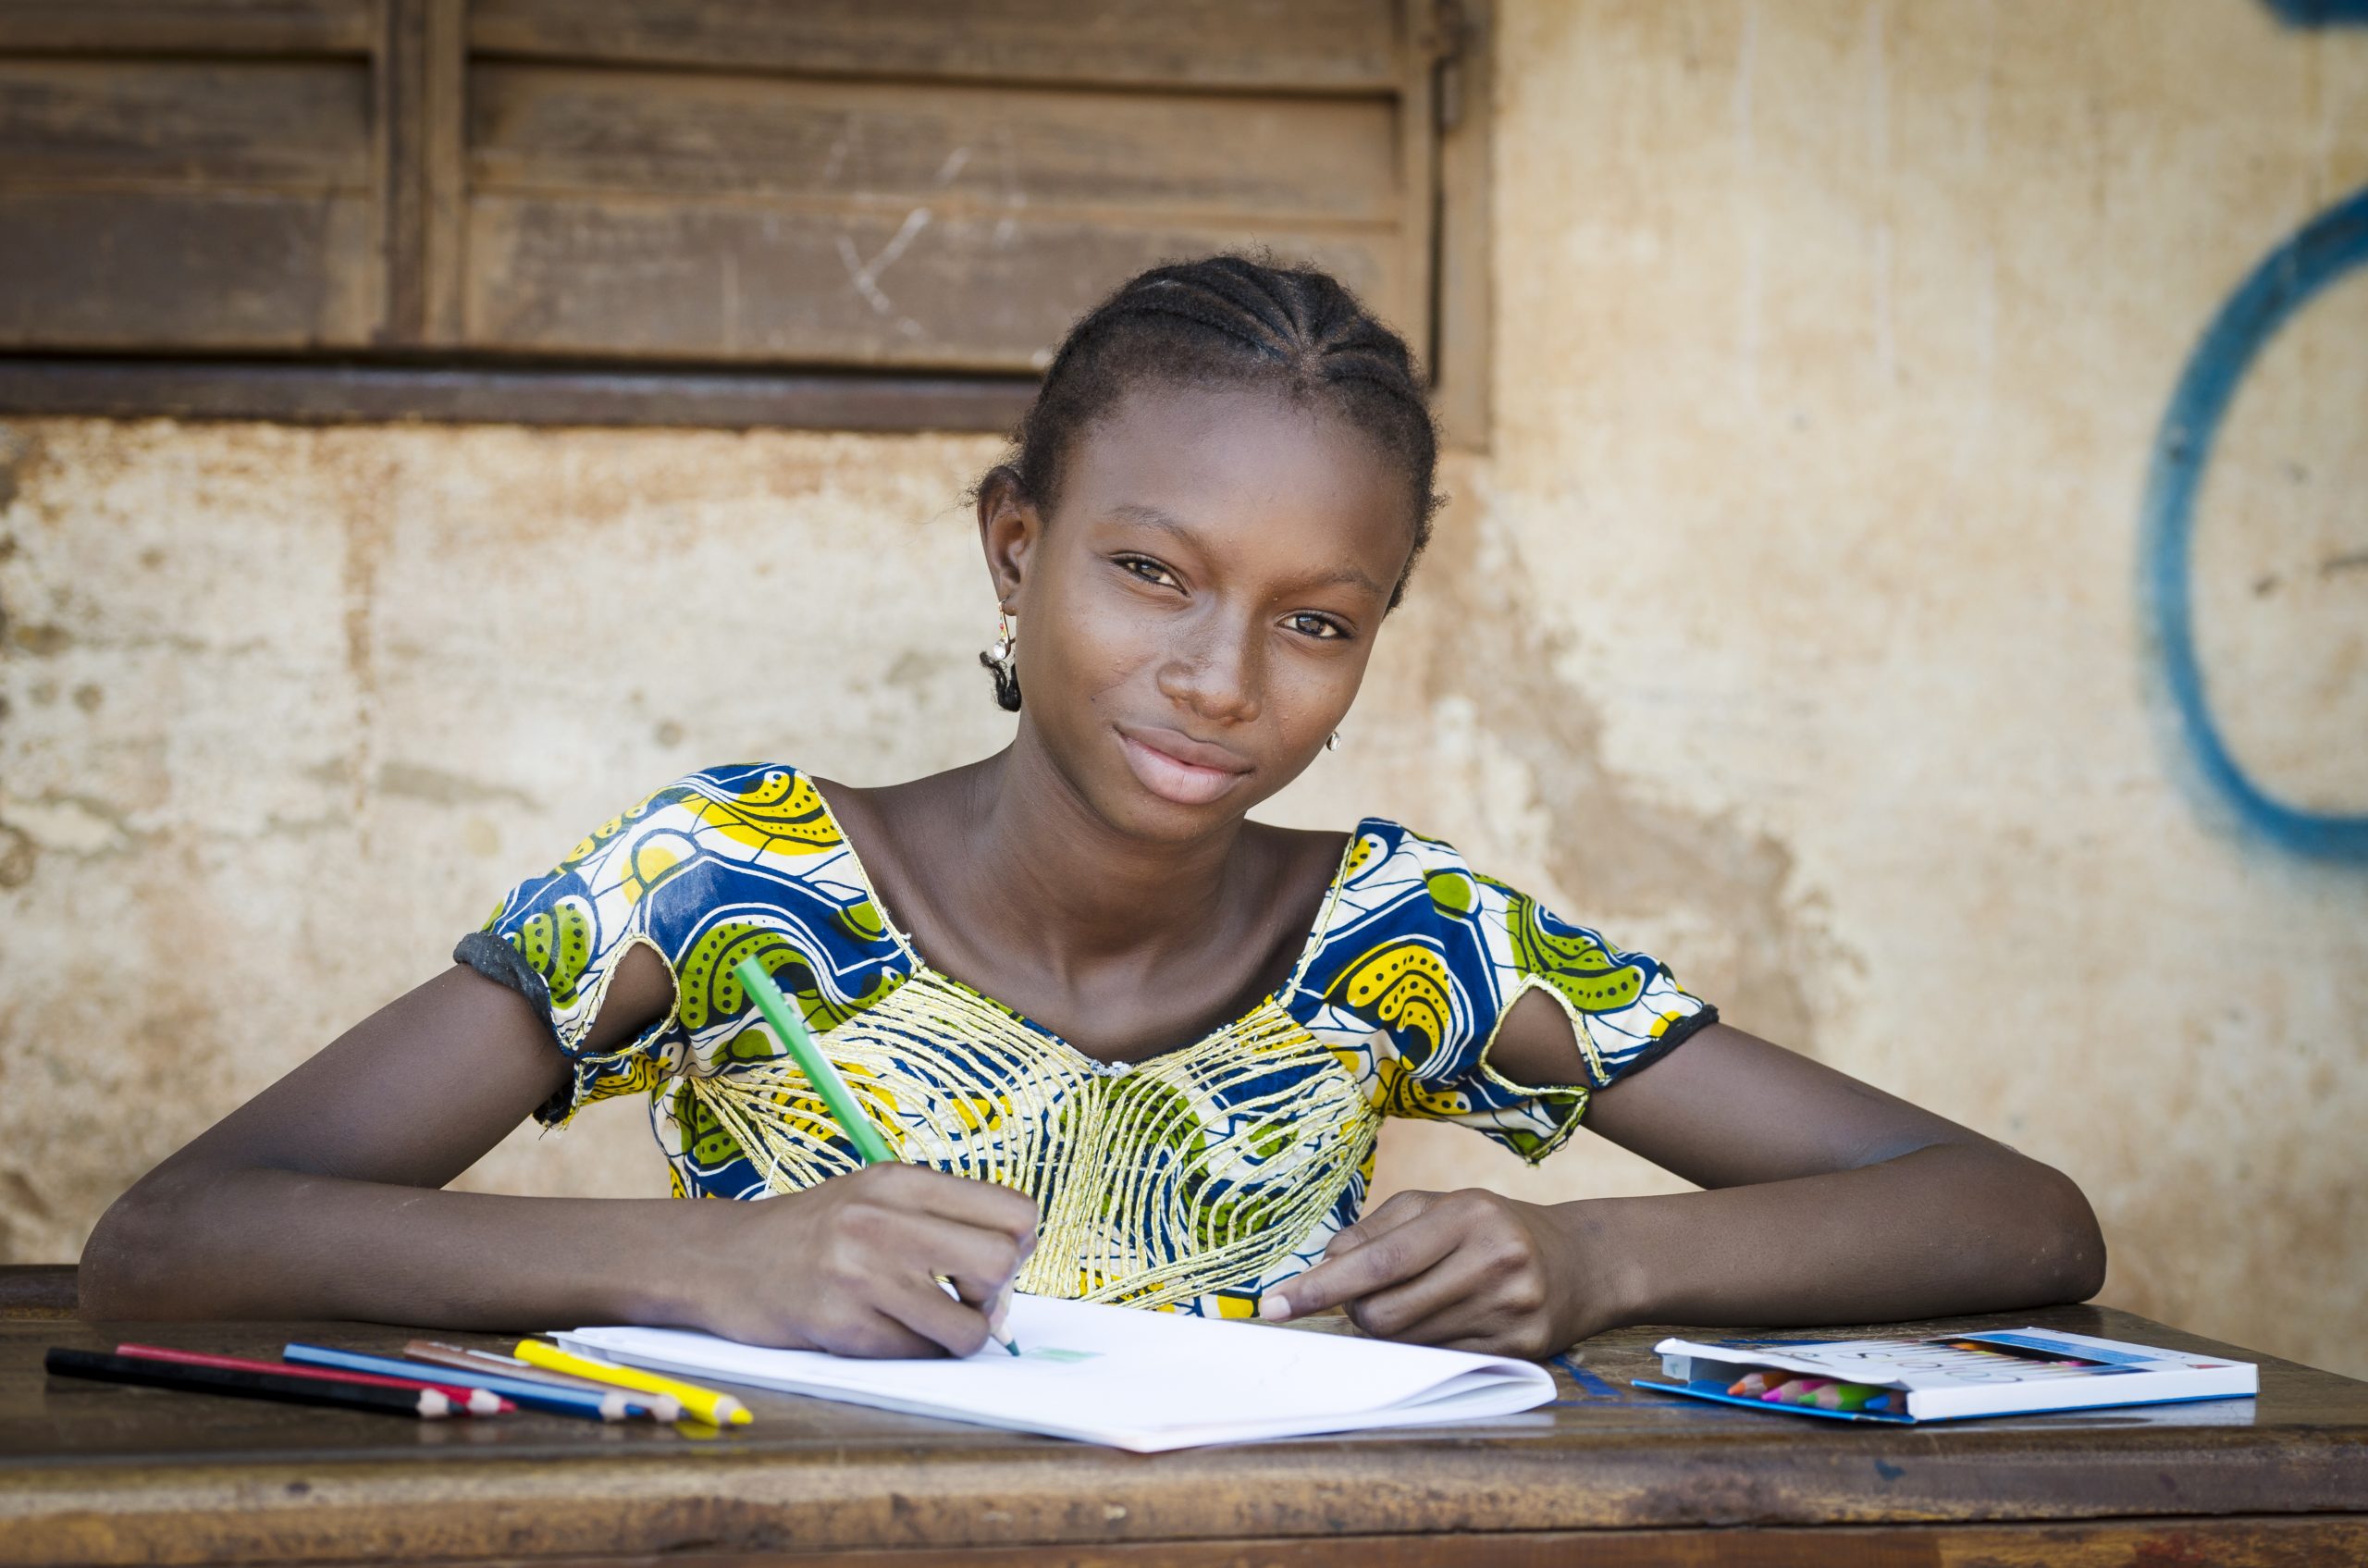 Portrait of an African ethnicity schoolgirl (age 13) in an educational environment in Bamako, Mali learning her lesson outdoors sitting on a desk and slightly smiling.